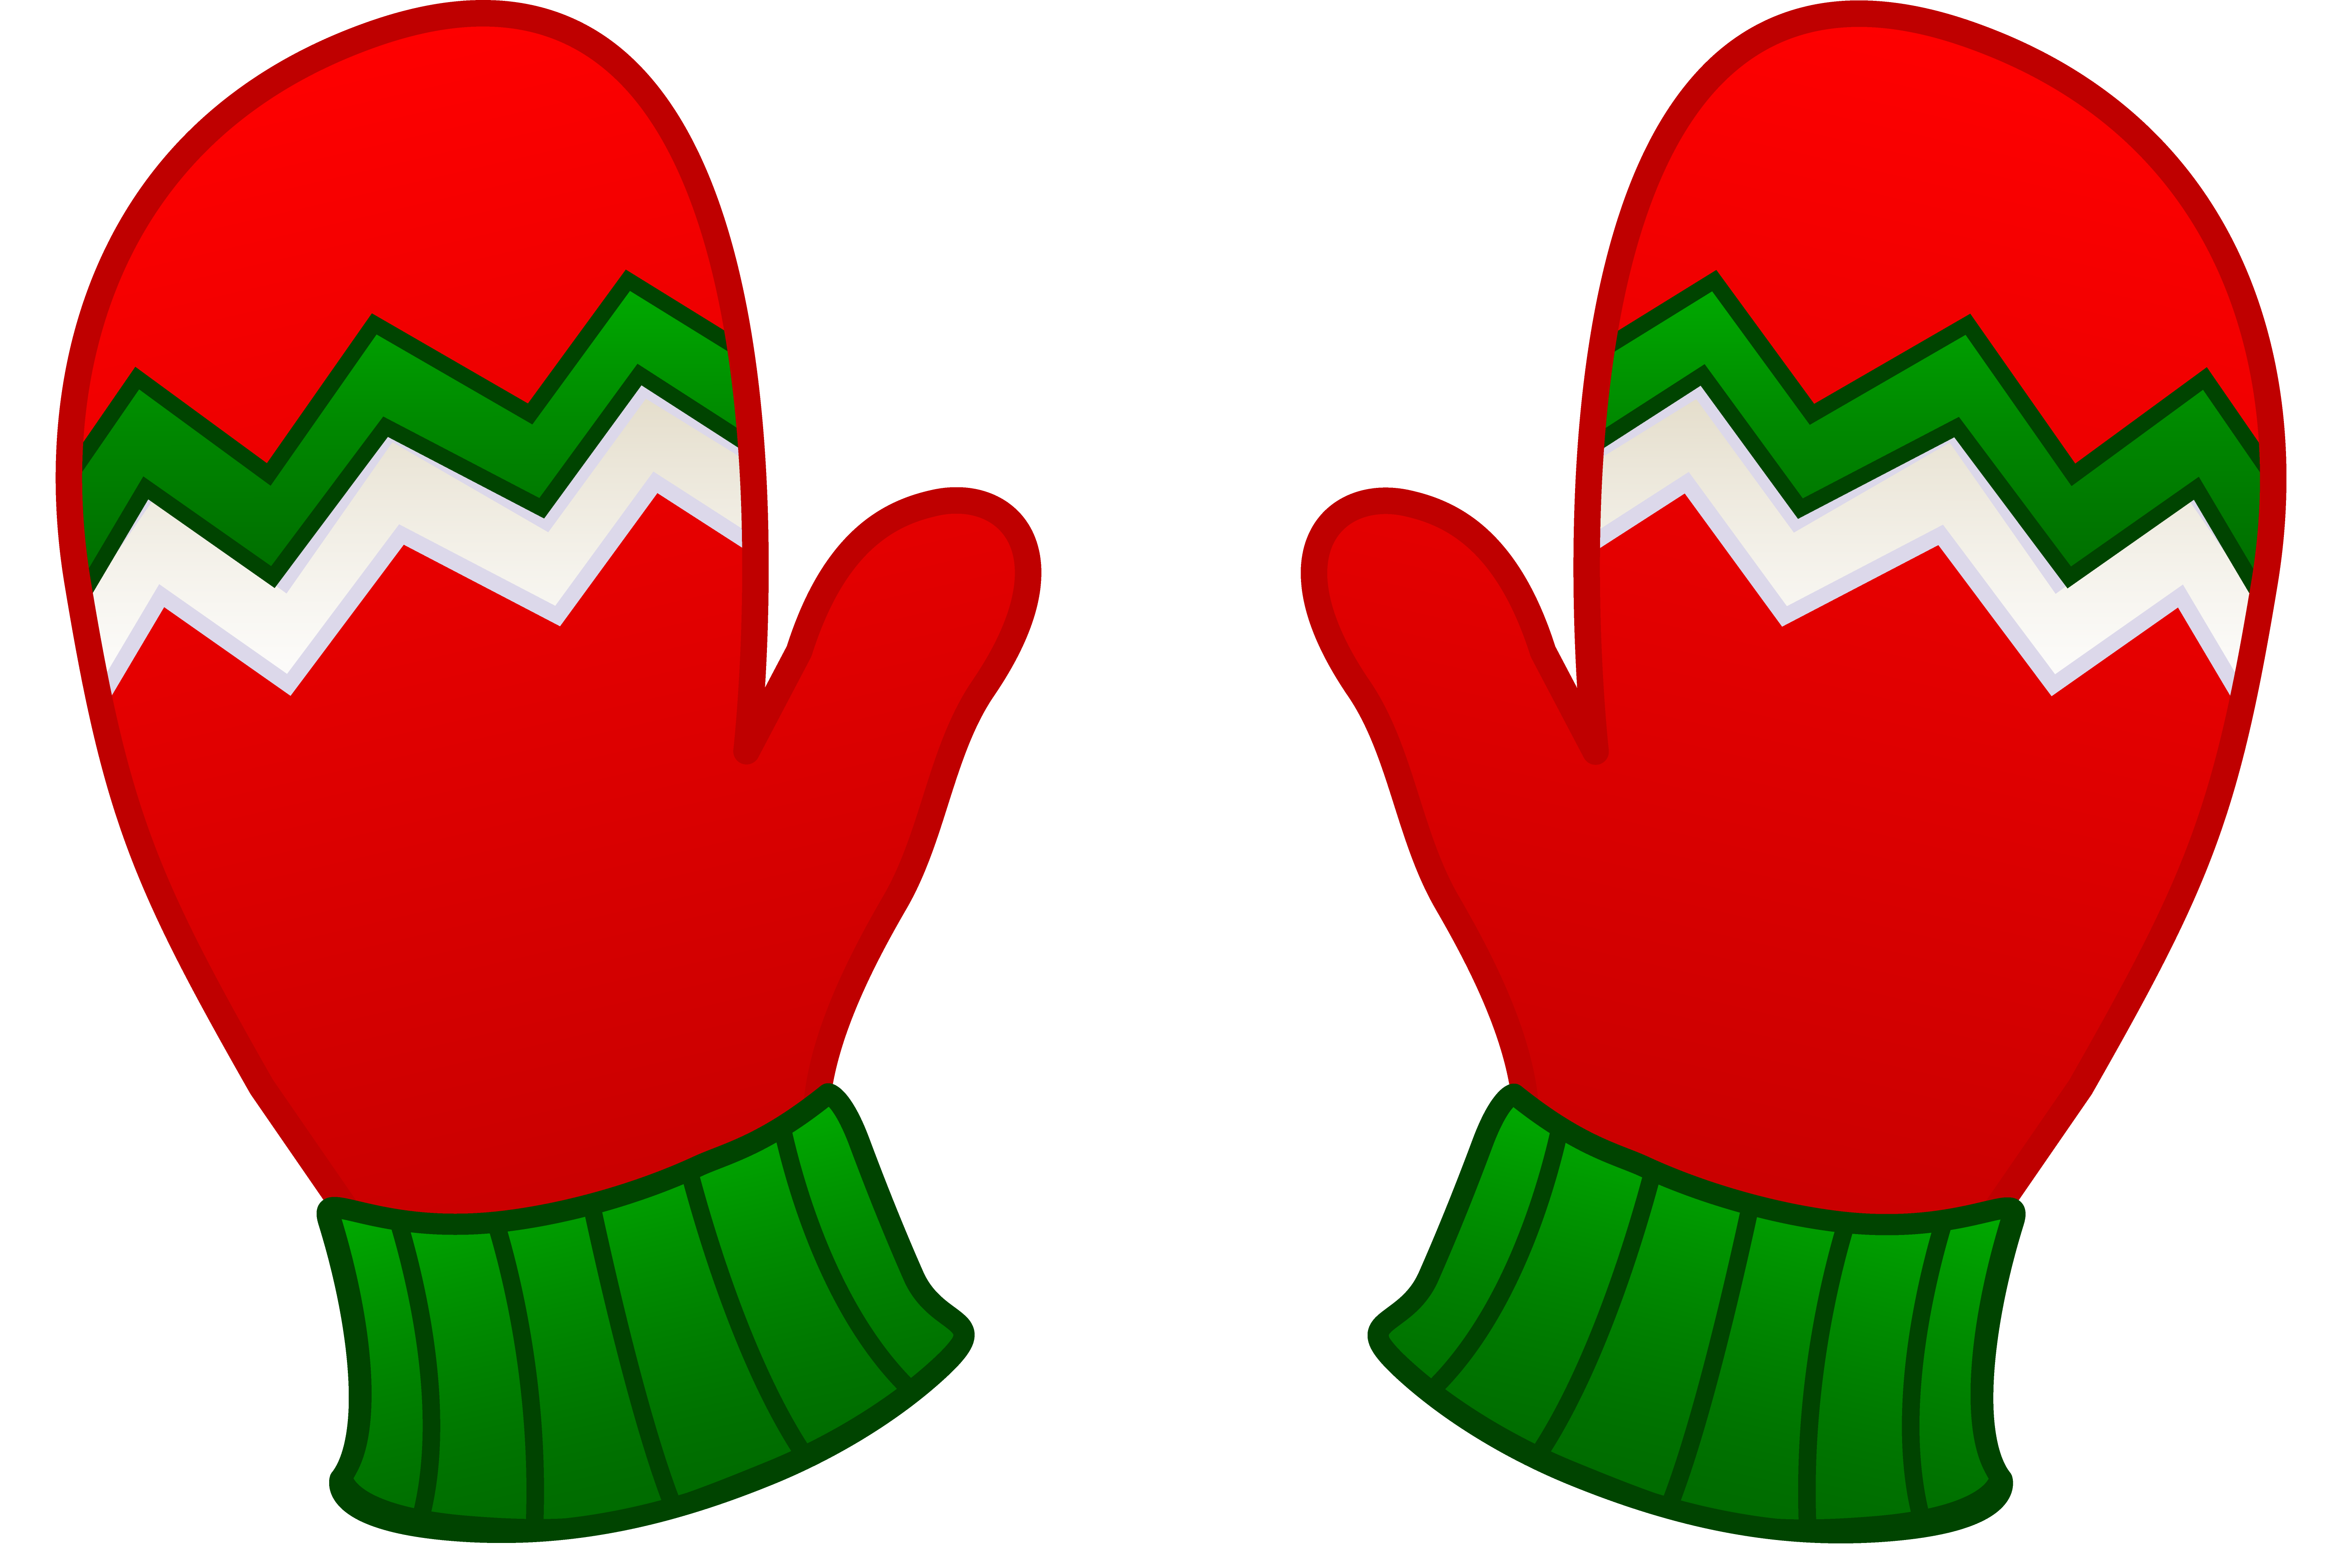 Hands clipart house. Free mitten cliparts download